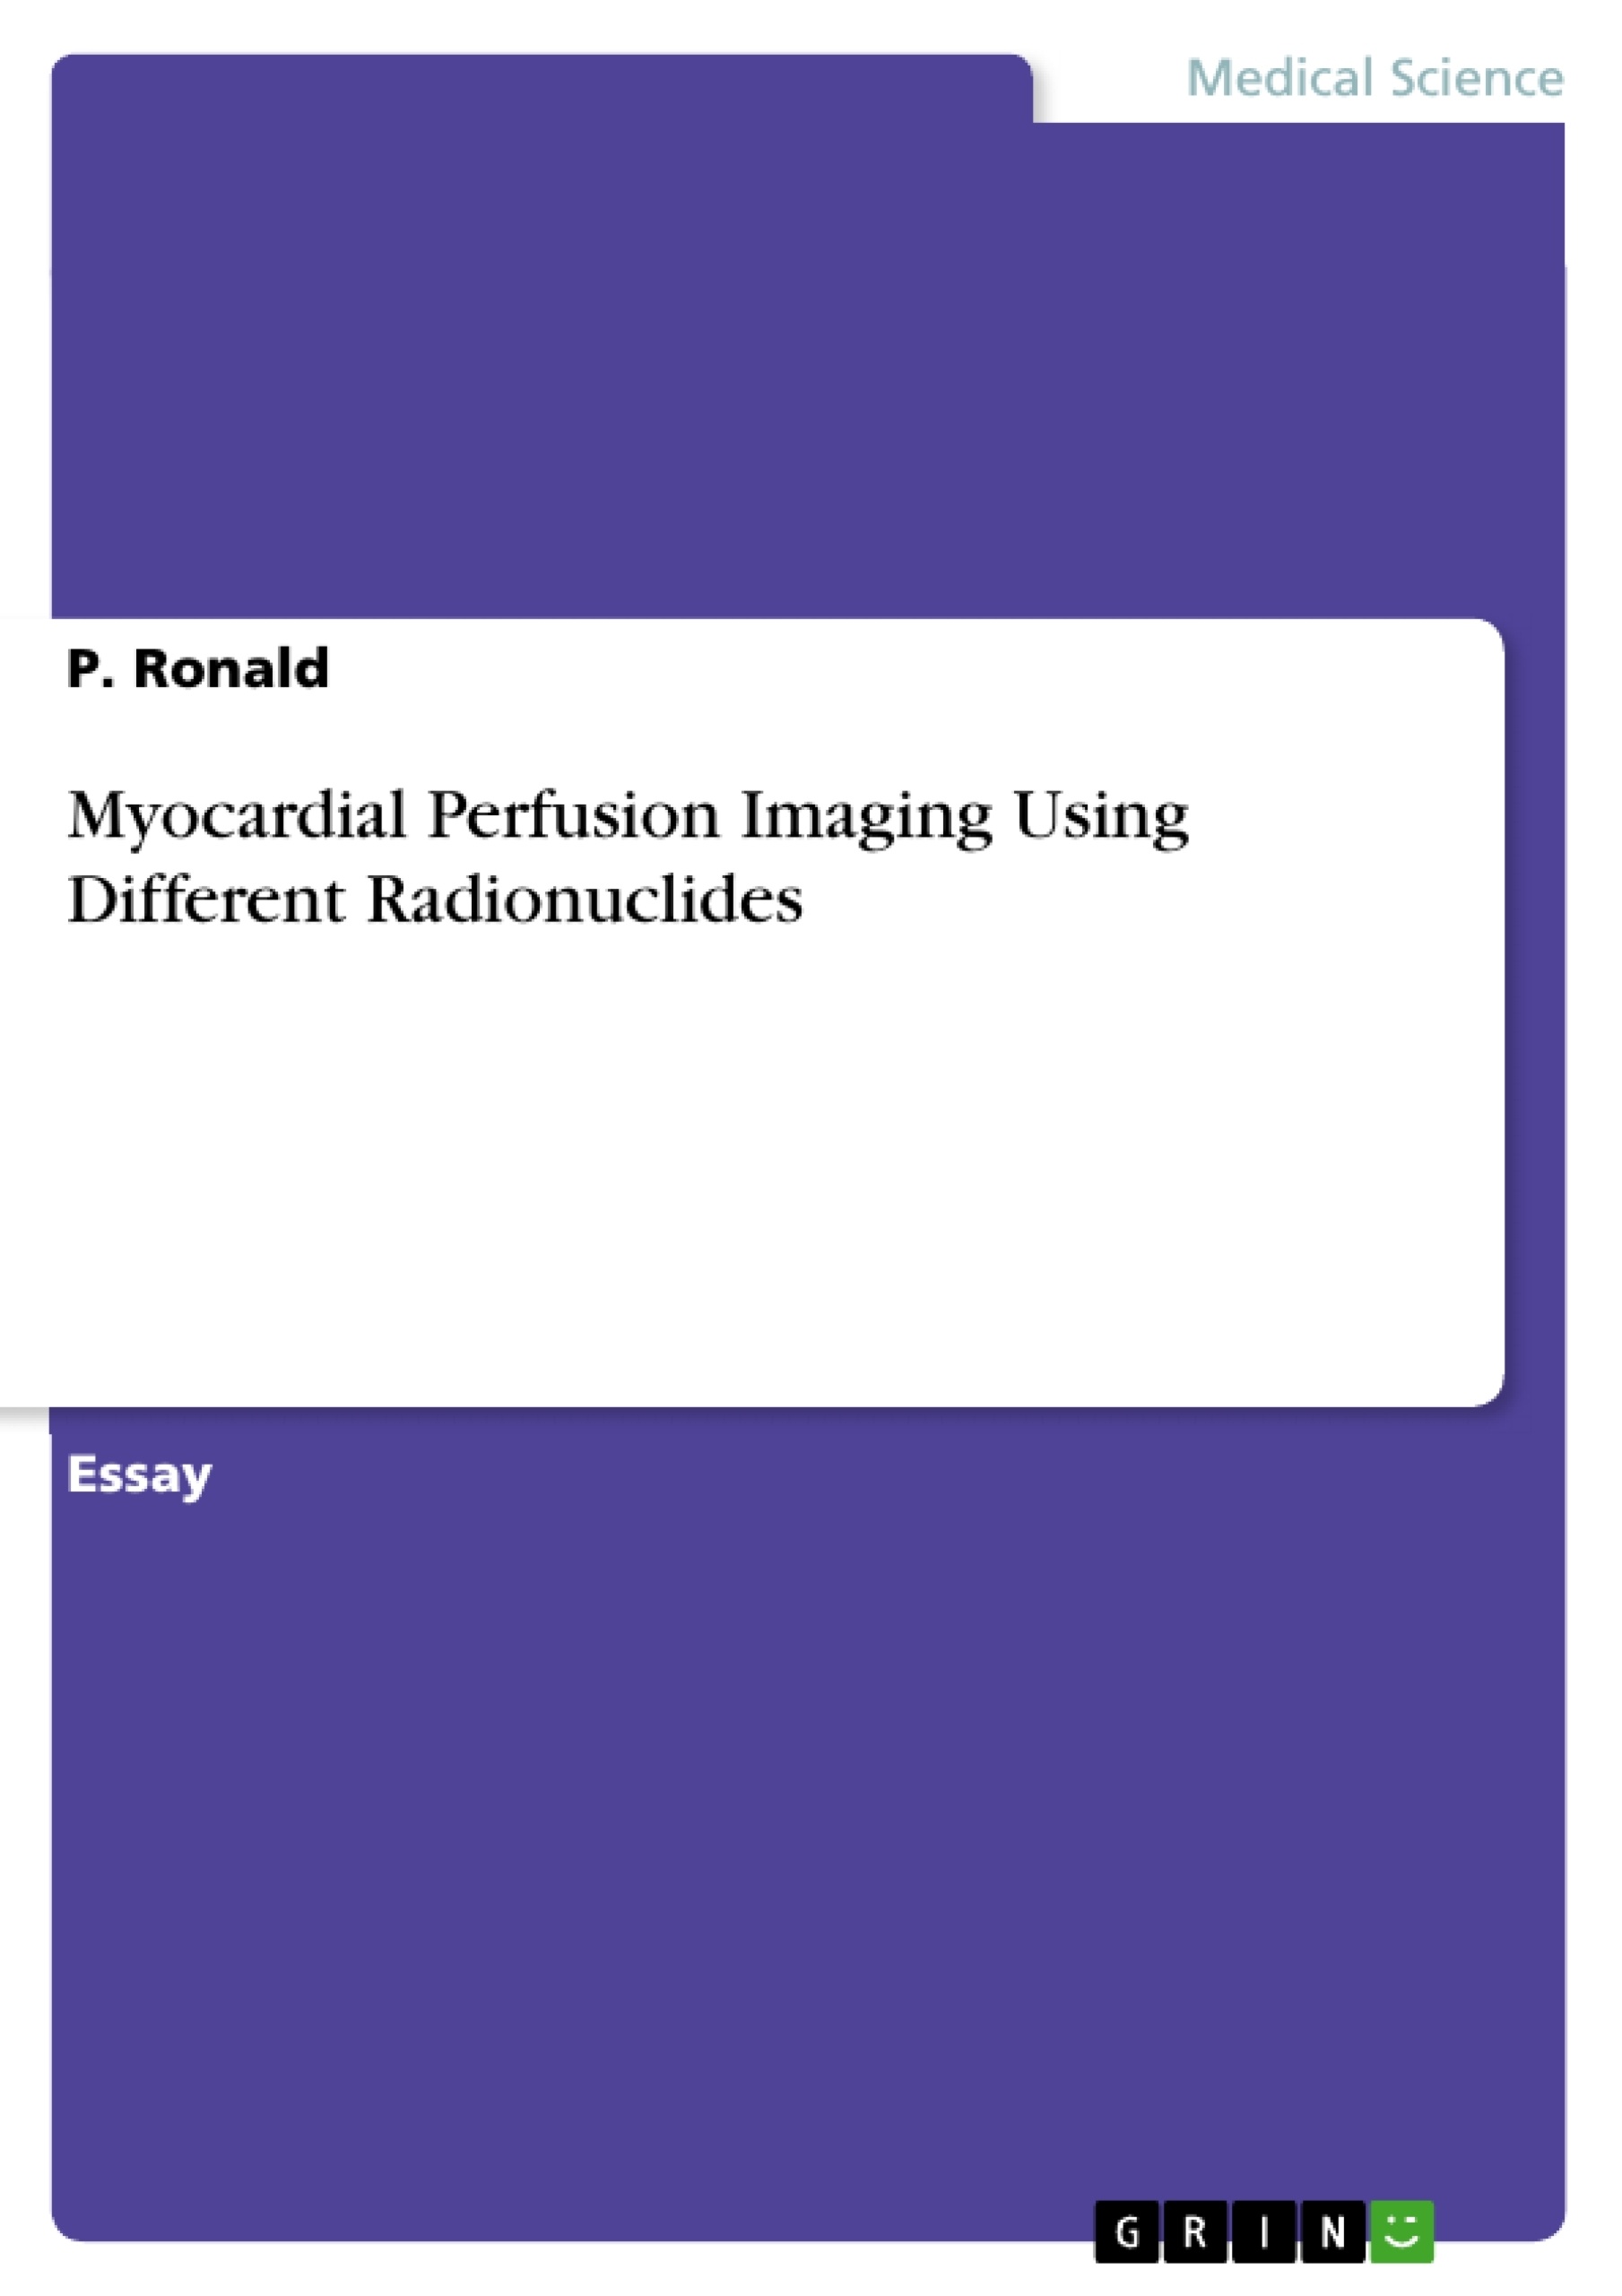 Titre: Myocardial Perfusion Imaging Using Different Radionuclides